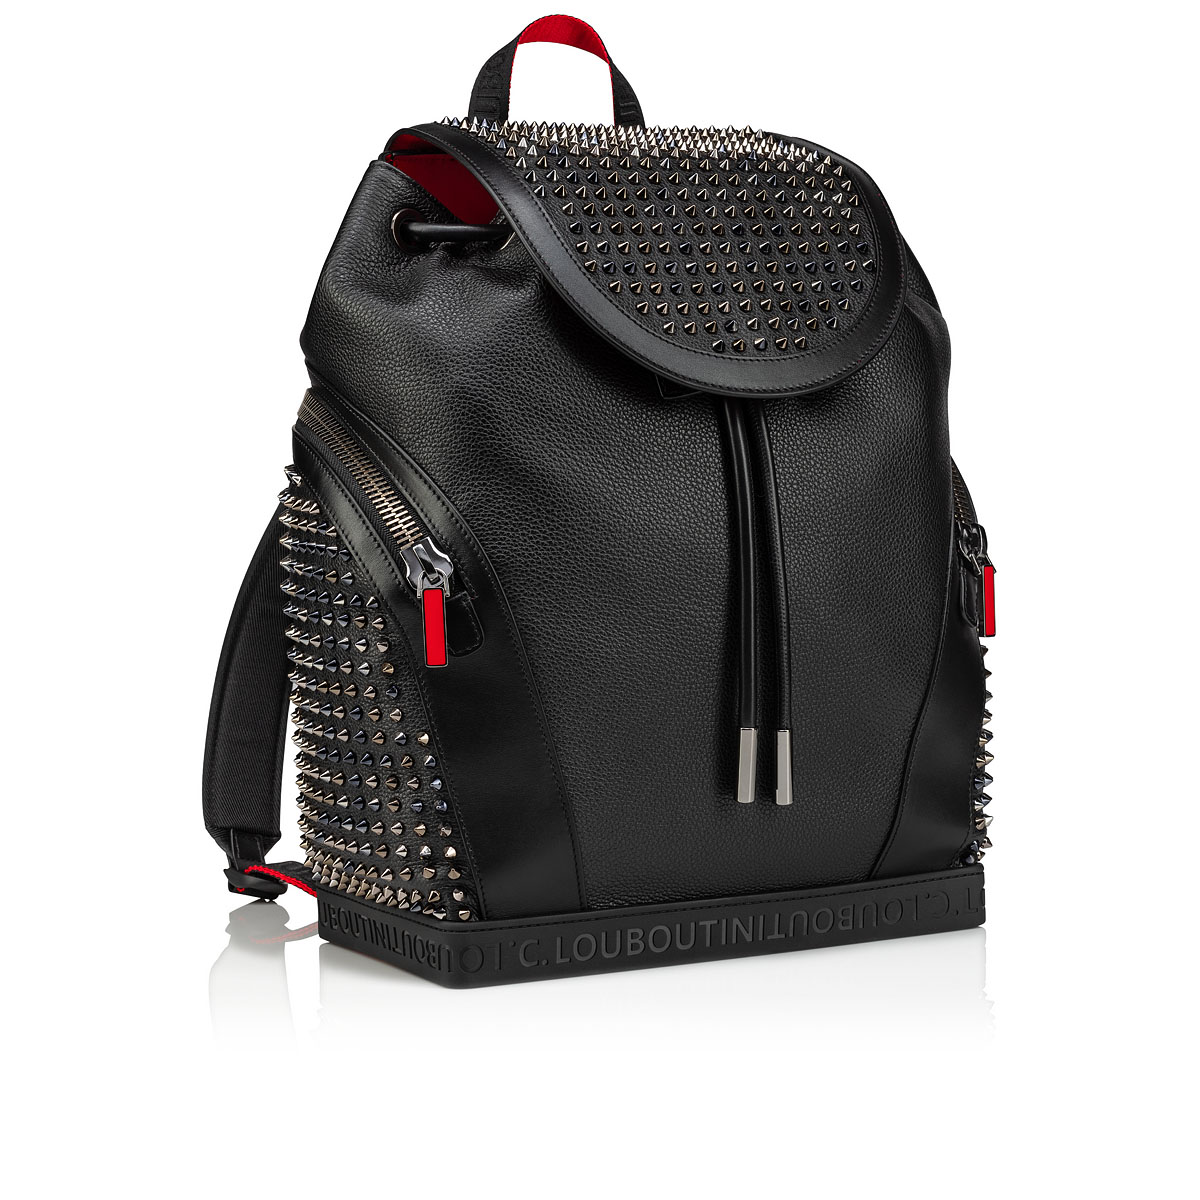 Explorafunk - Backpack - Calf leather and spikes - Black 